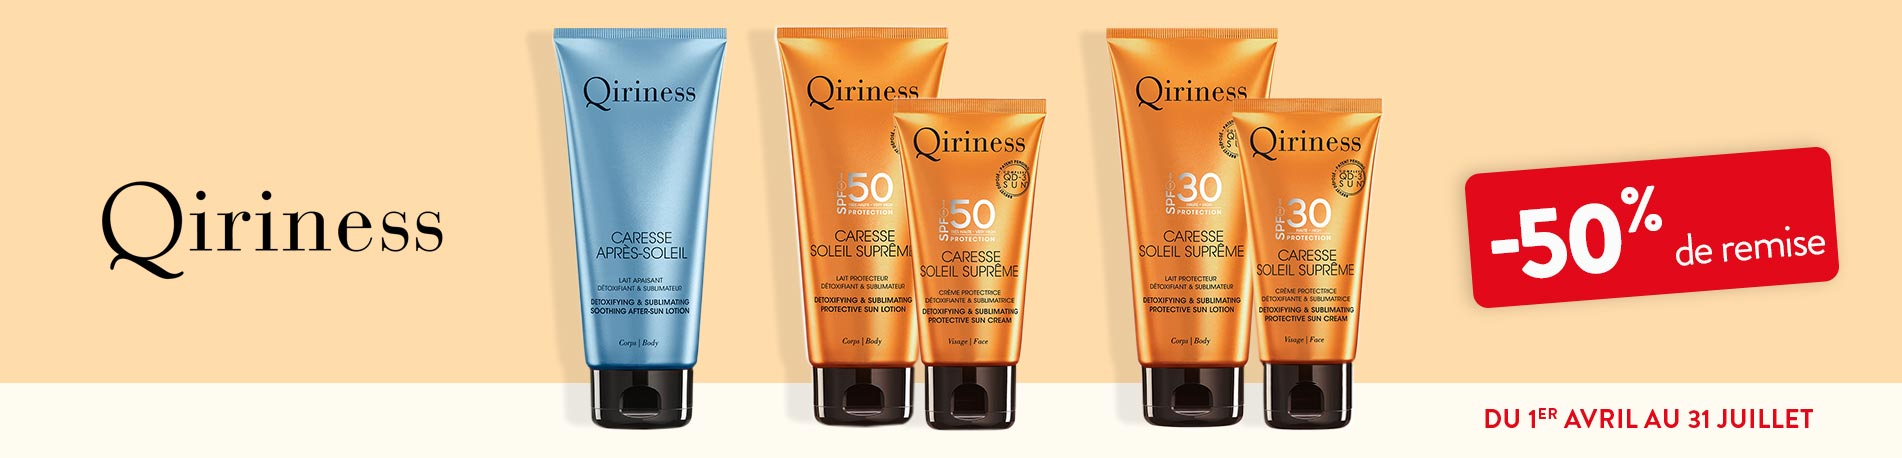 Promotion Qiriness solaire